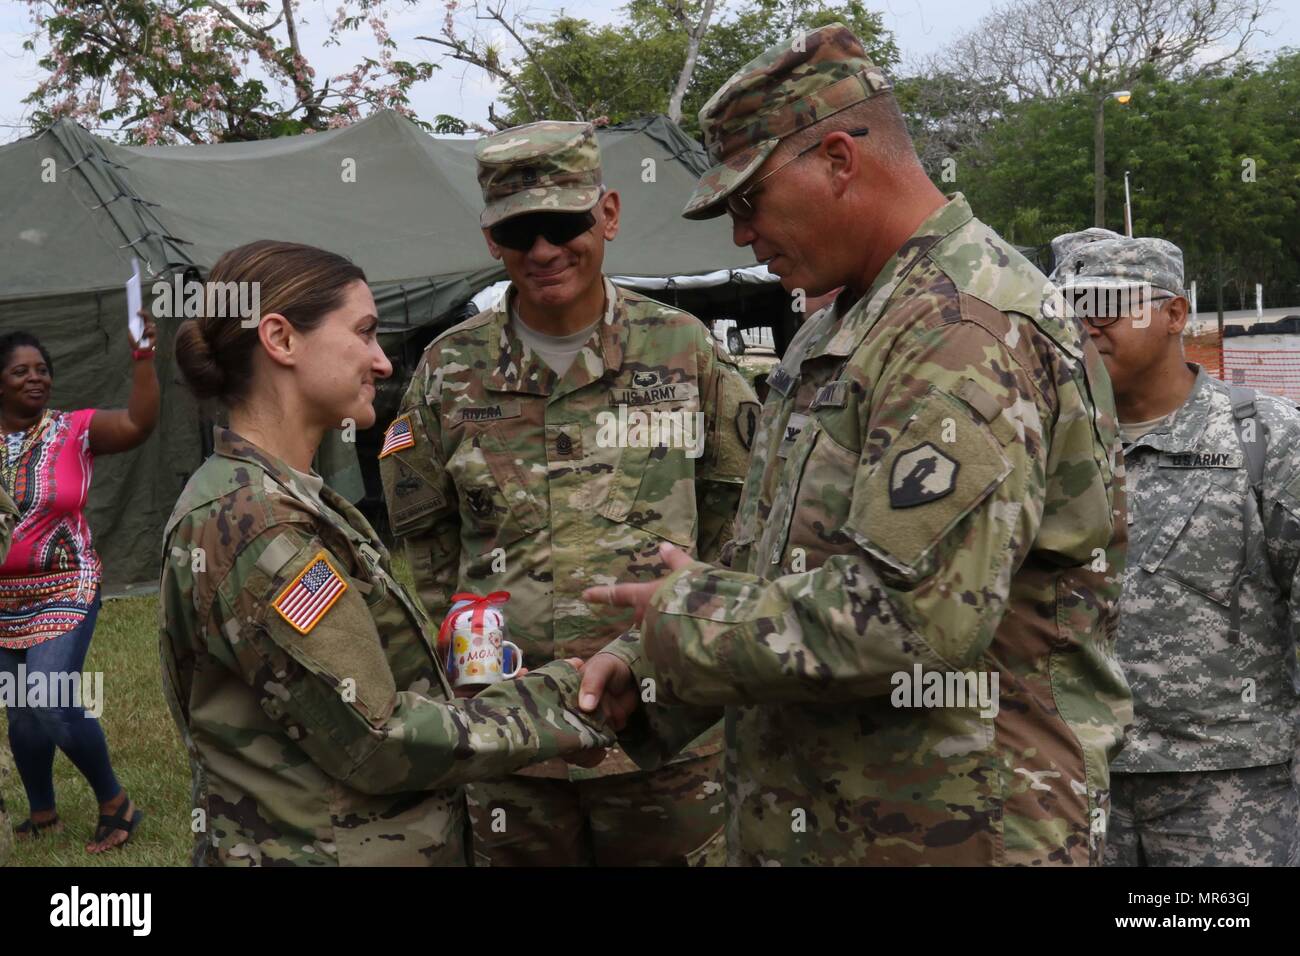 Command Sgt. Maj. Angel Rivera and Col. John Simma, both serving with the 210th Regional Support Group from Puerto Rico, present a Mother's day gift to Capt. Anne-Marie Octavio, who serves as a nurse practitioner for the Wyoming National Guard Medical Detachment. Octavio and a staff of medical professionals have been administering free health care during Beyond the Horizon 2017. (US Army Photo by Sgt. 1st Class Whitney Houston) Stock Photo